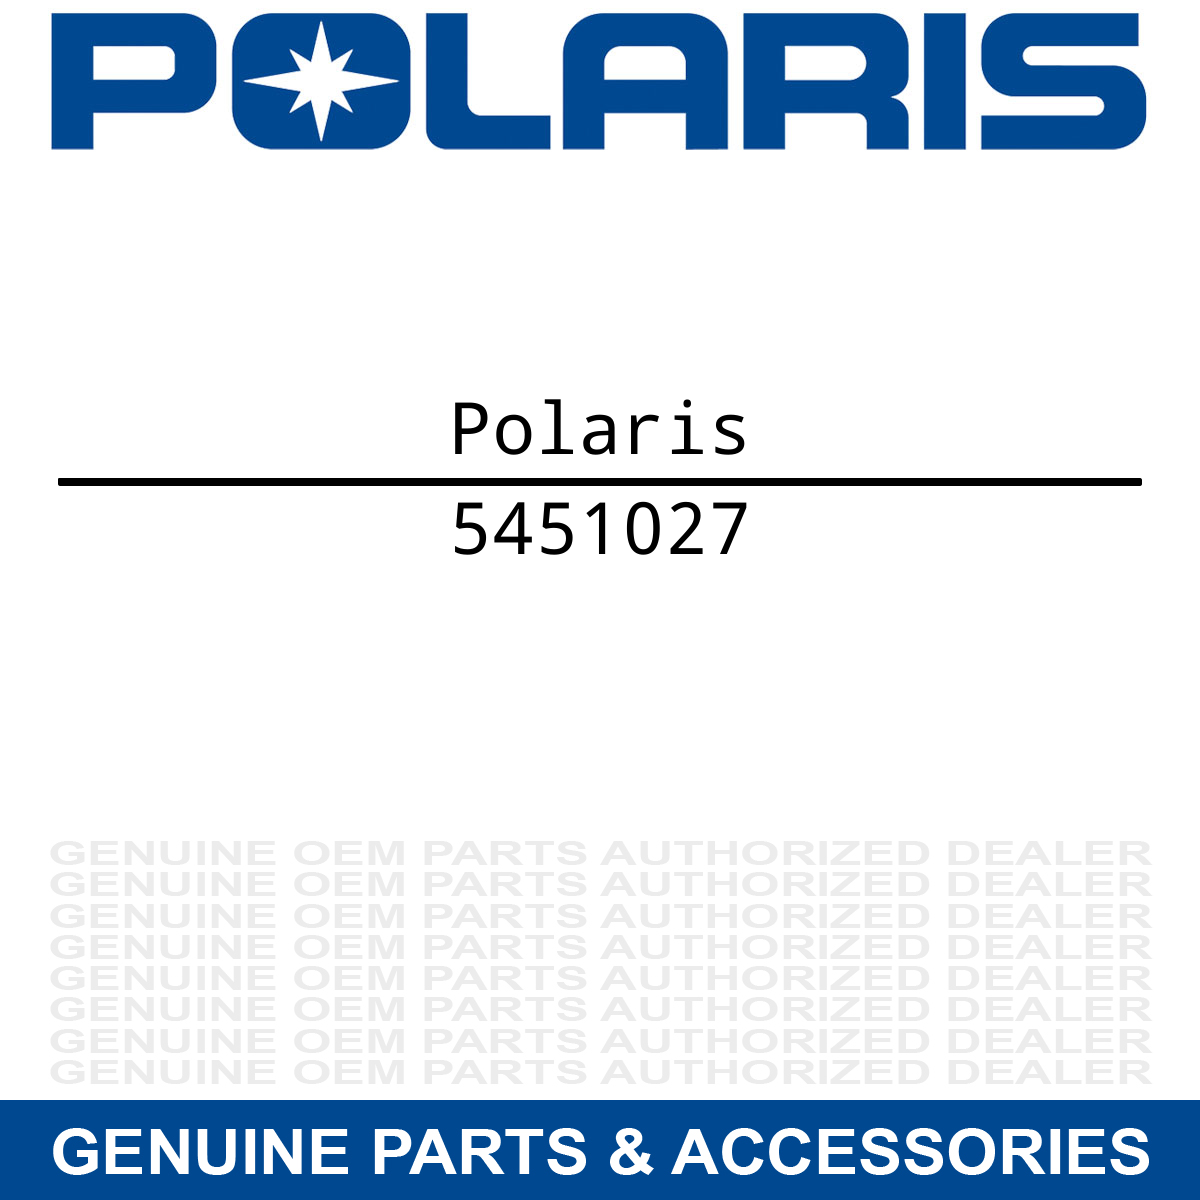 Polaris 5451027 Right Hand Engine Cover w/ Inserts